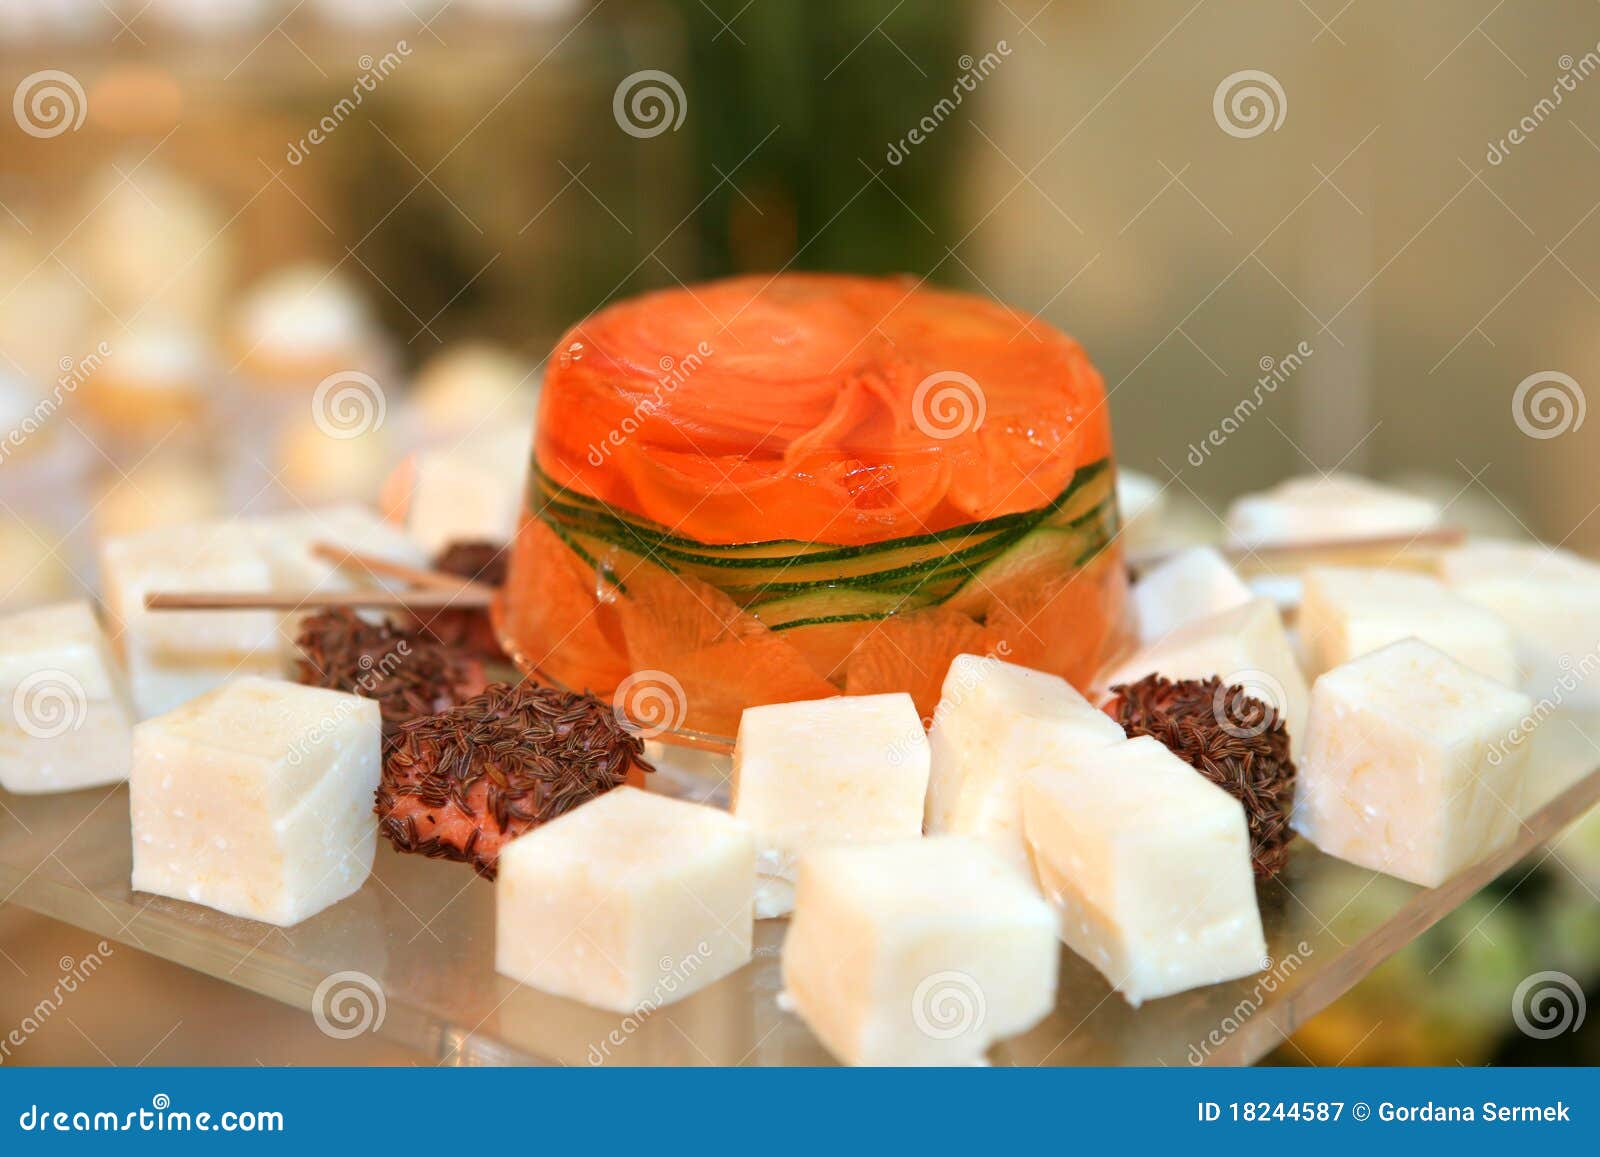 aspic with carrot